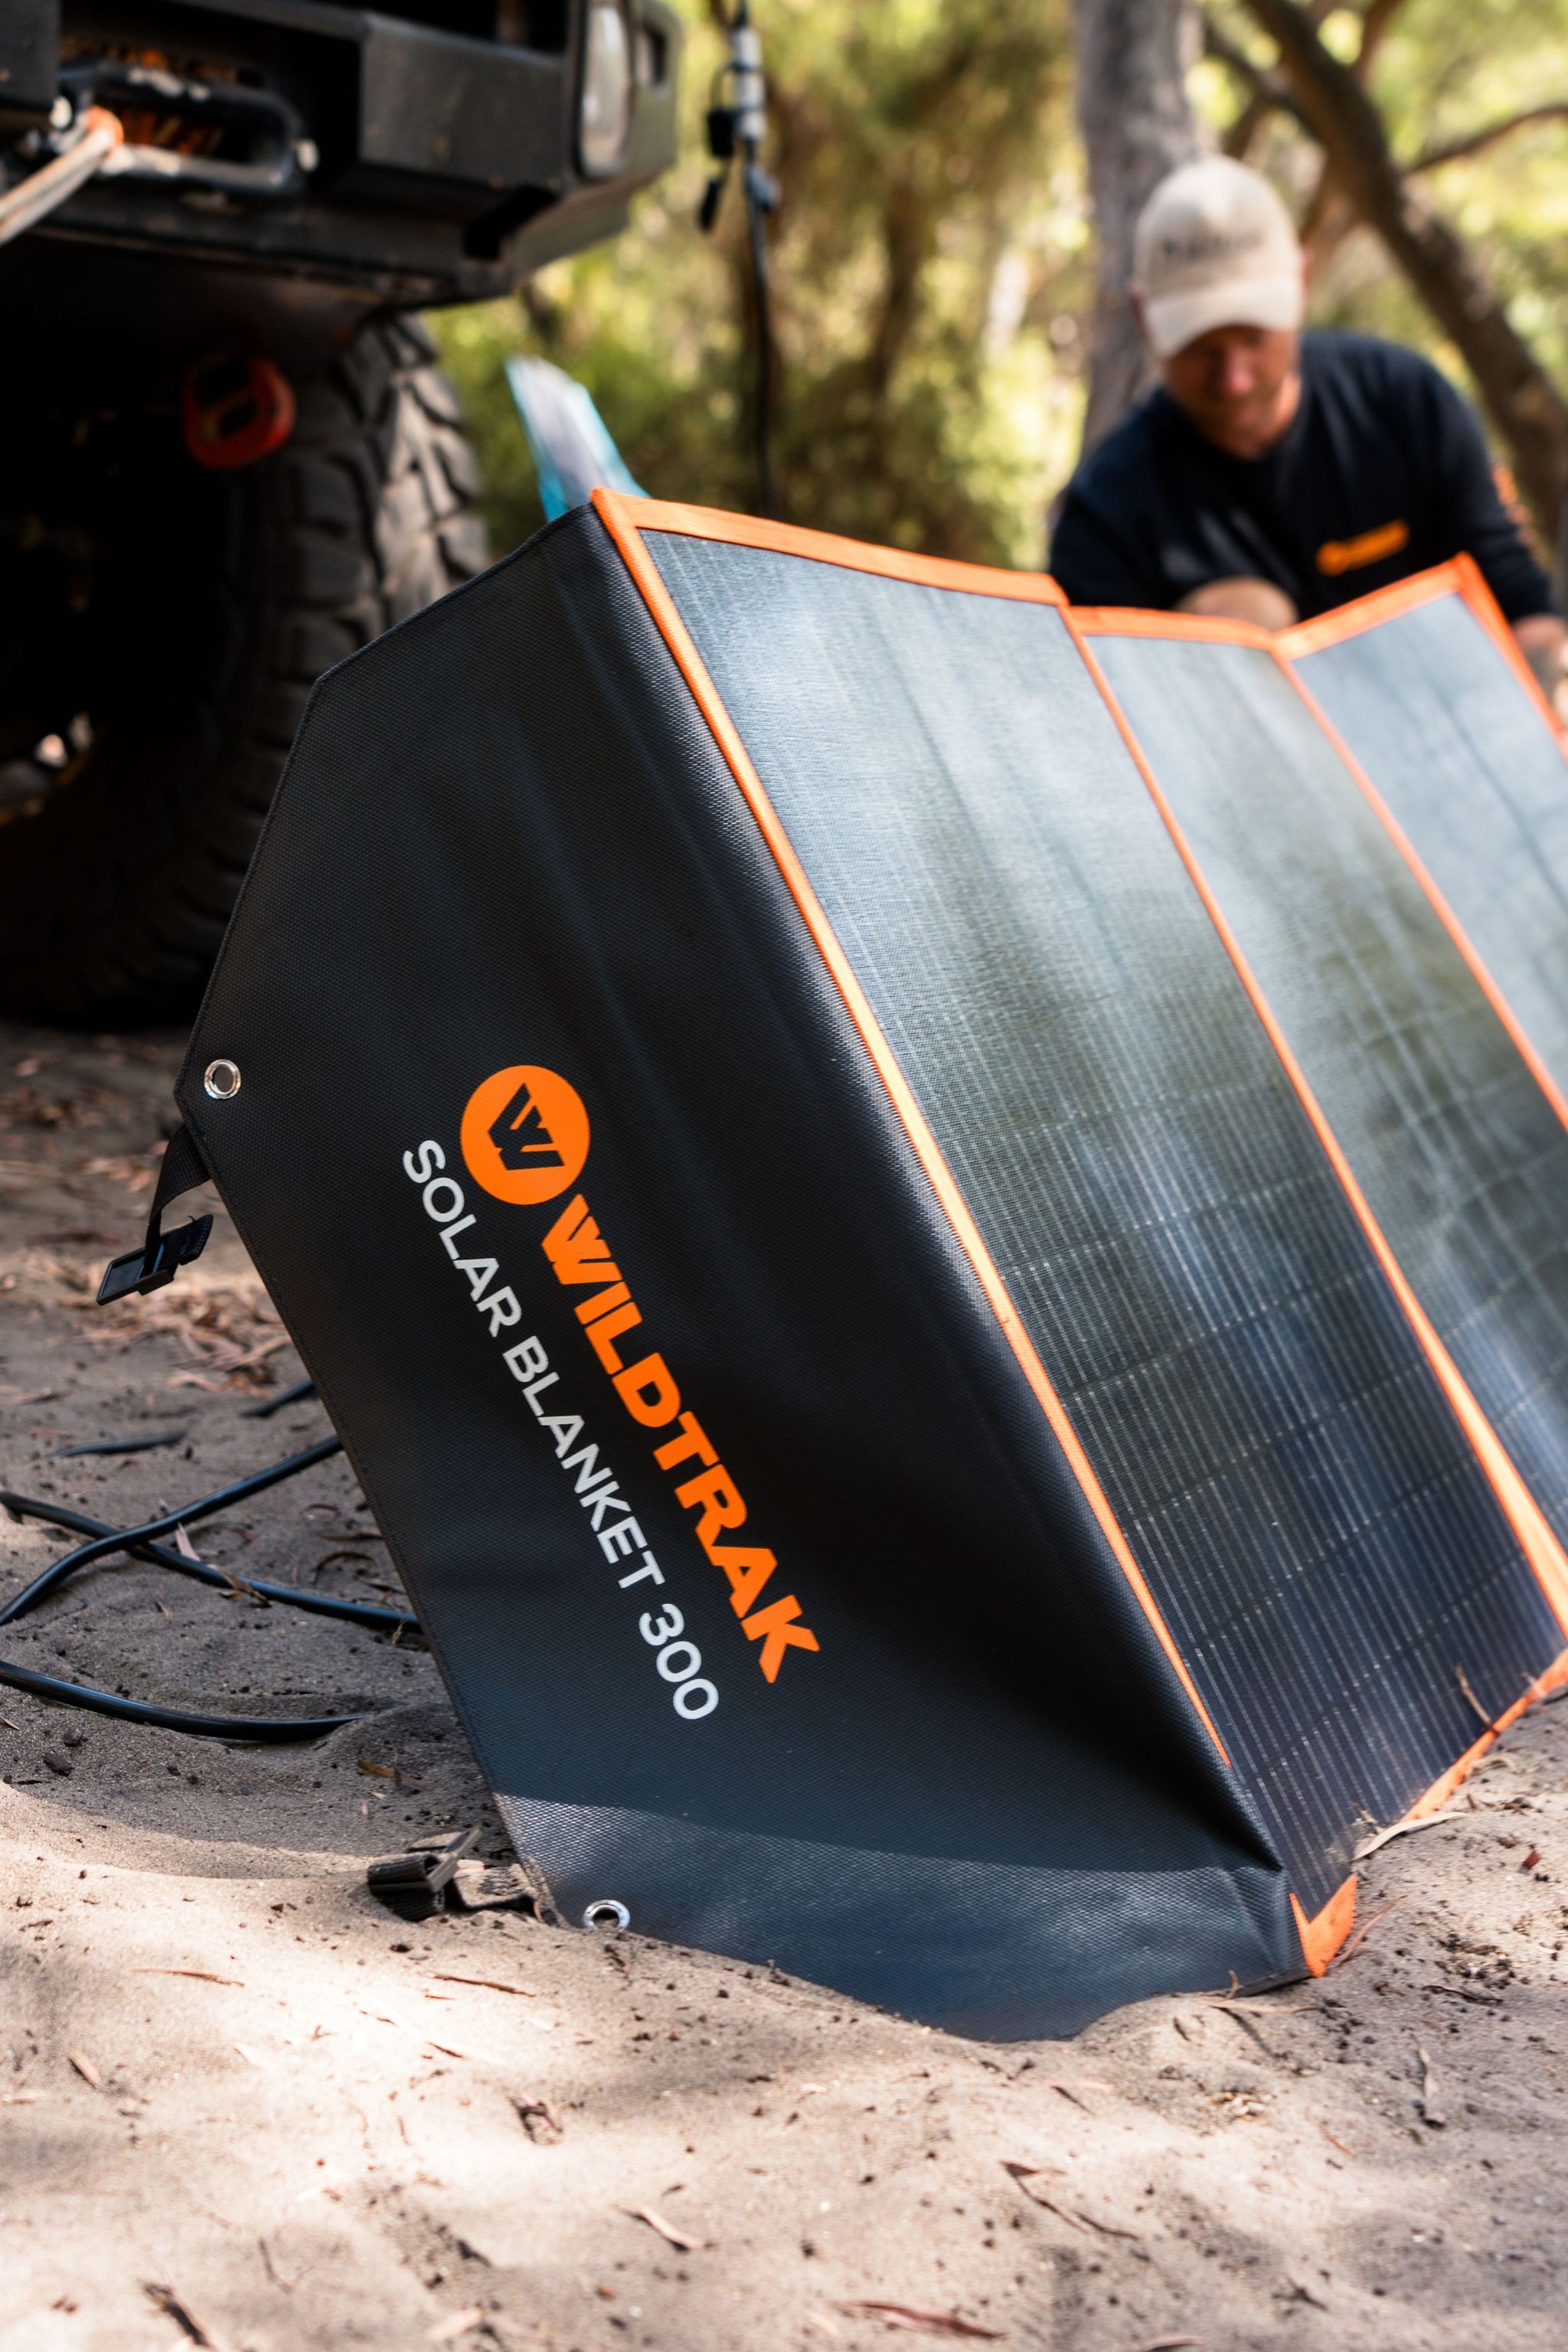 FOLDING 300 WATT SOLAR BLANKET WITH BUILT IN STAND AND ETFE COATING